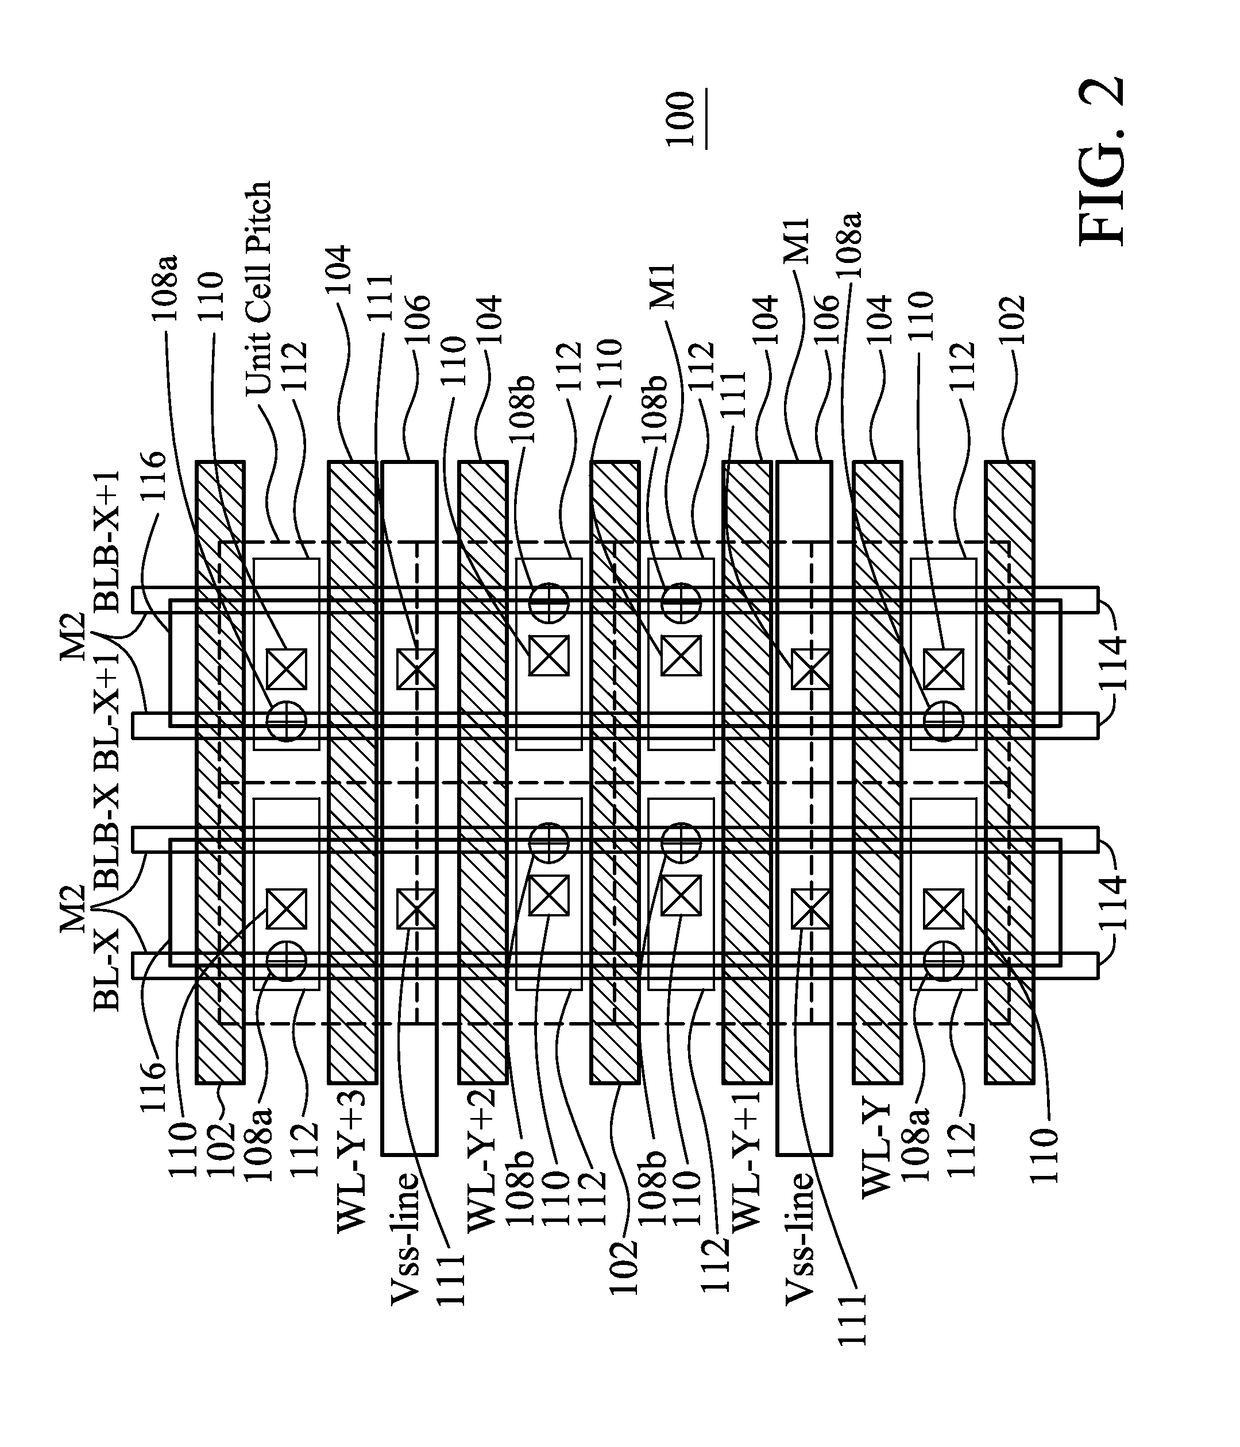 ROM cell having an isolation transistor formed between first and second pass transistors and connected between a differential bitline pair